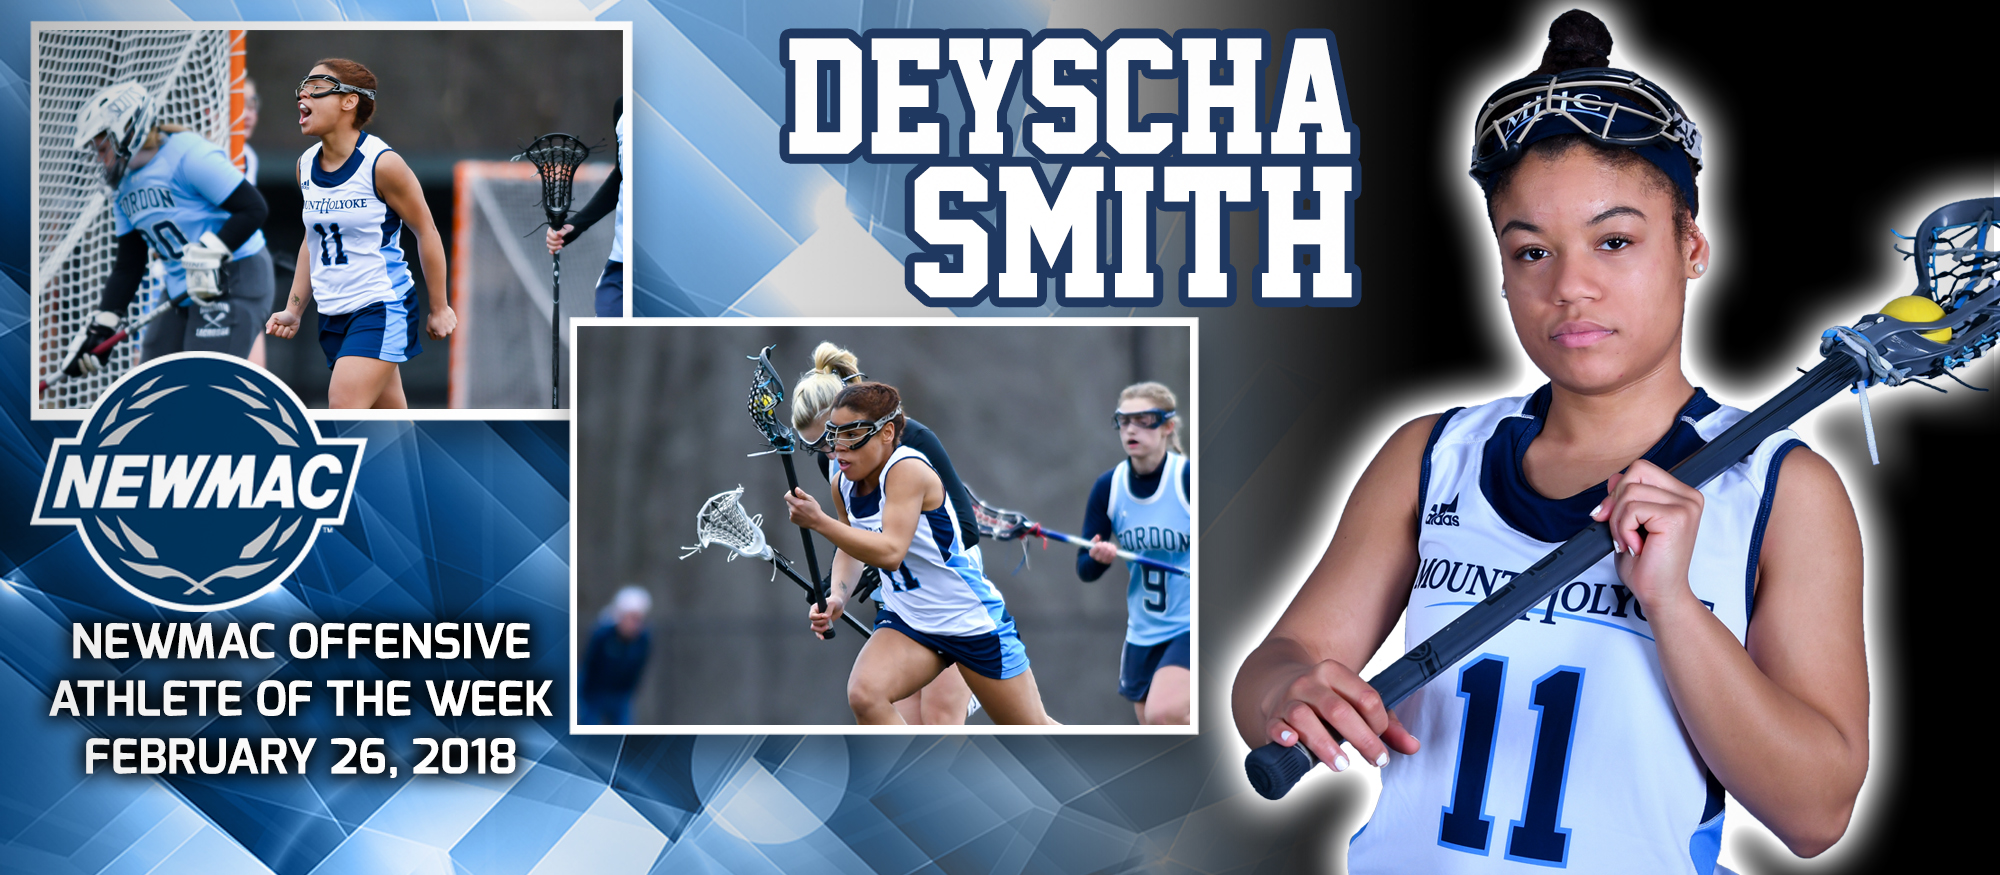 Action graphic promoting Lyons lacrosse student-athlete, Deyscha Smith who was named the NEWMAC Offensive Athlete of the Week for February 25th following her five goal, season-opening performance.